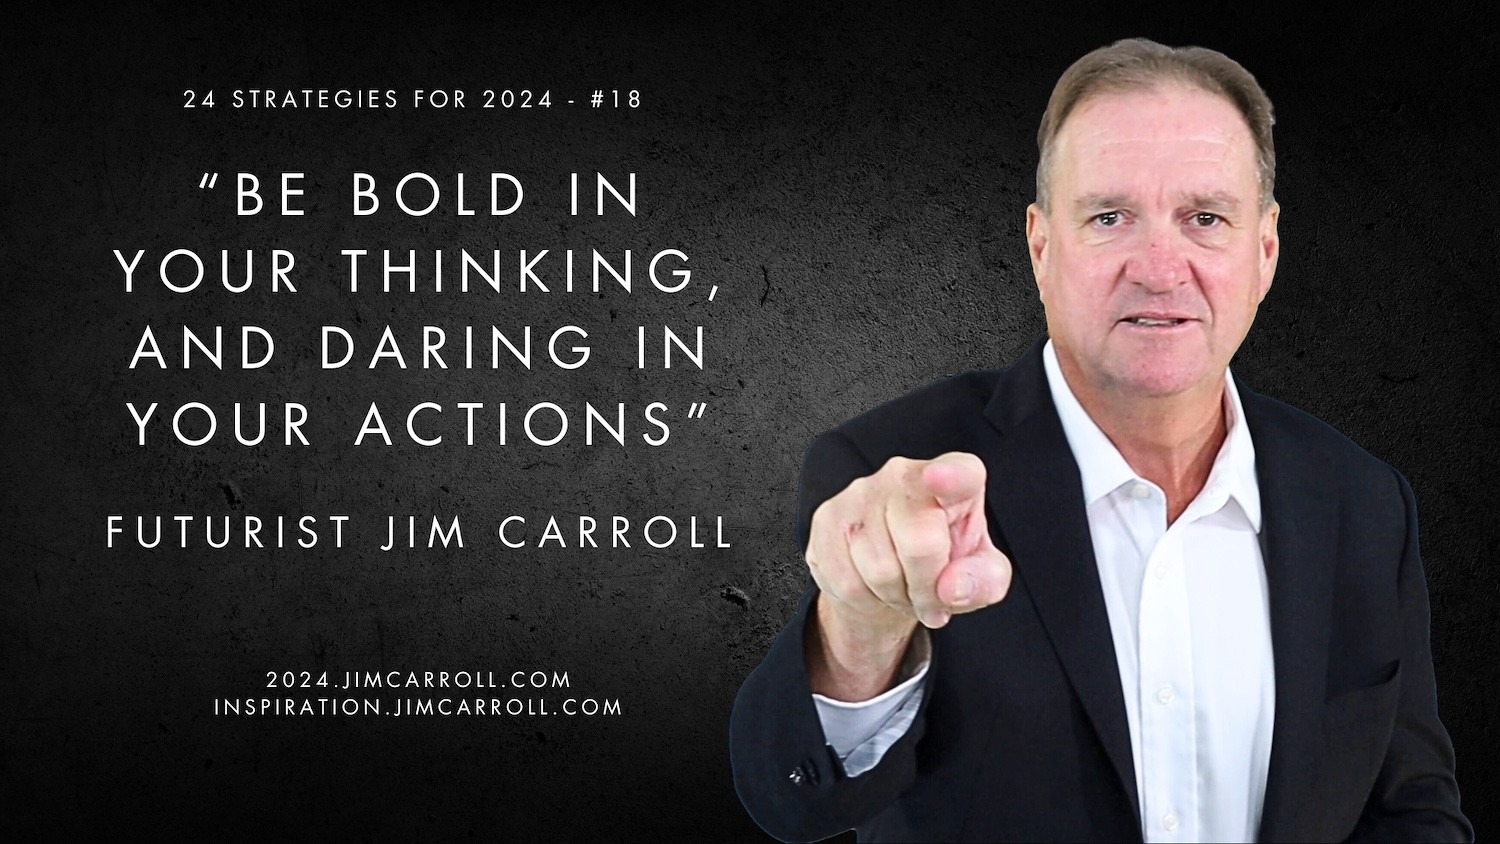 "Be bold in your thinking, and daring in your actions" - Futurist Jim Carroll